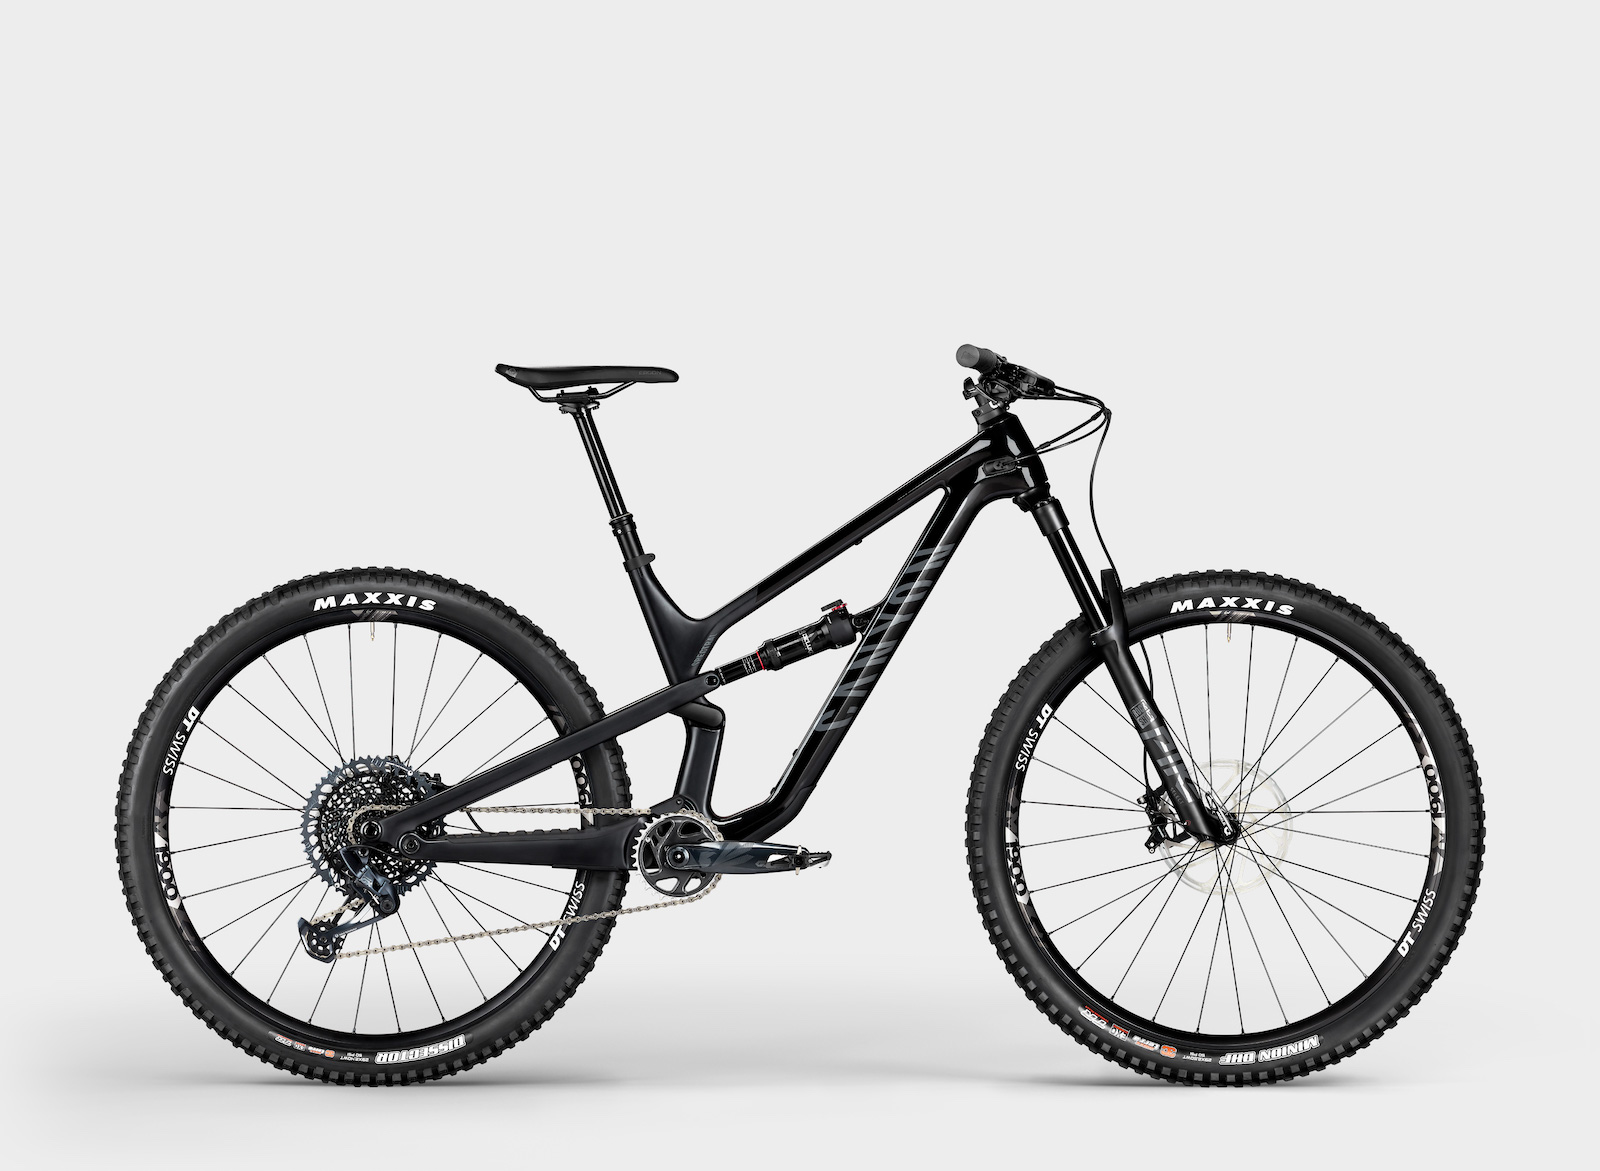 Canyon Spectral 29